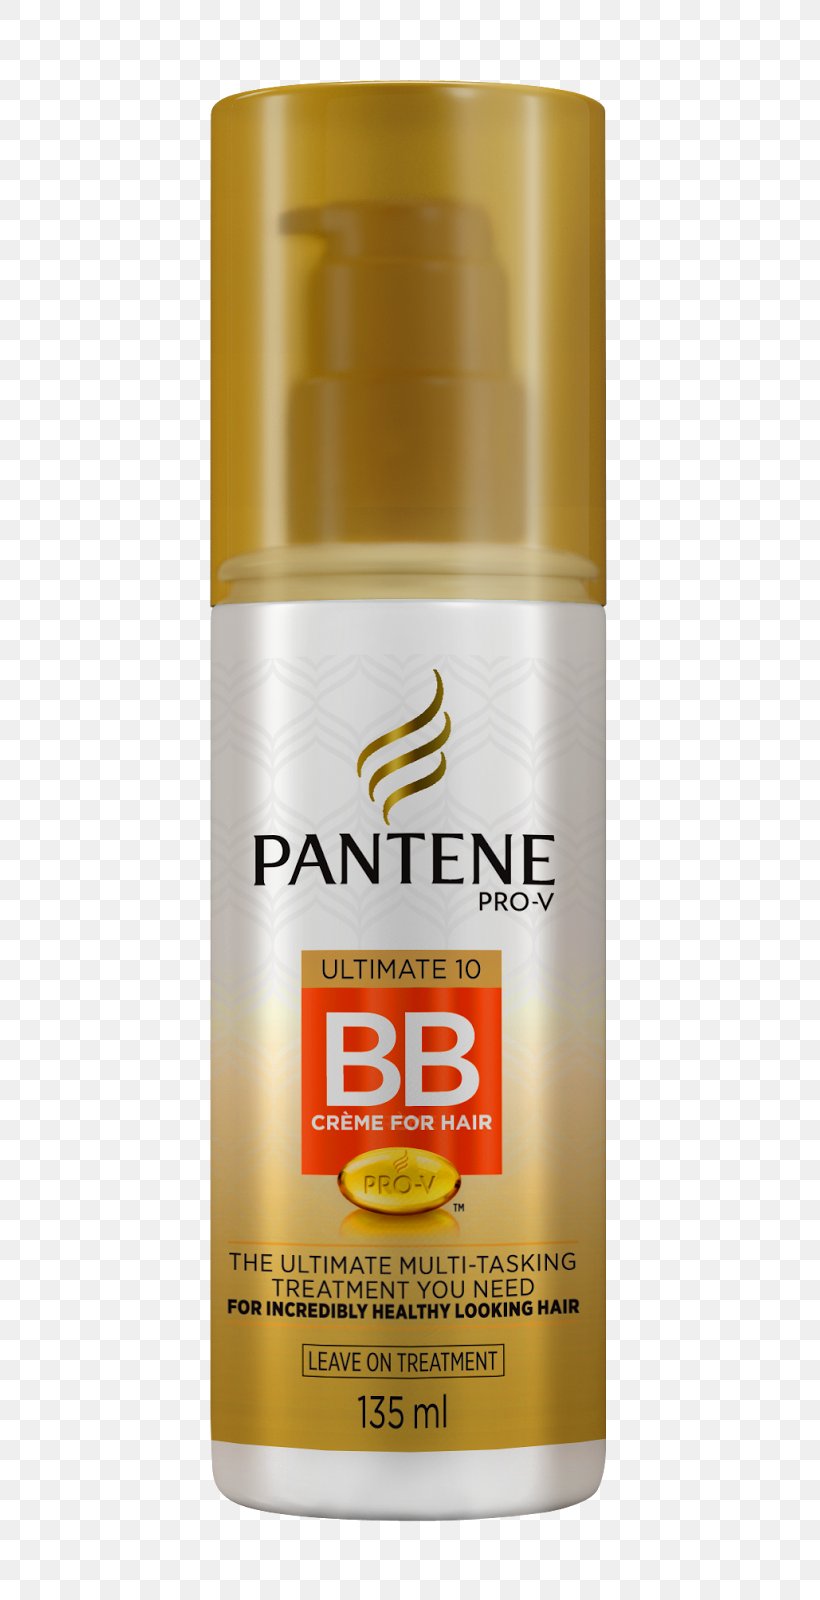 Lotion Pantene Pro-V Ultimate 10 BB Crème For Hair Cream Hair Care, PNG, 659x1600px, Lotion, Balsam, Bun, Cream, Dandruff Download Free